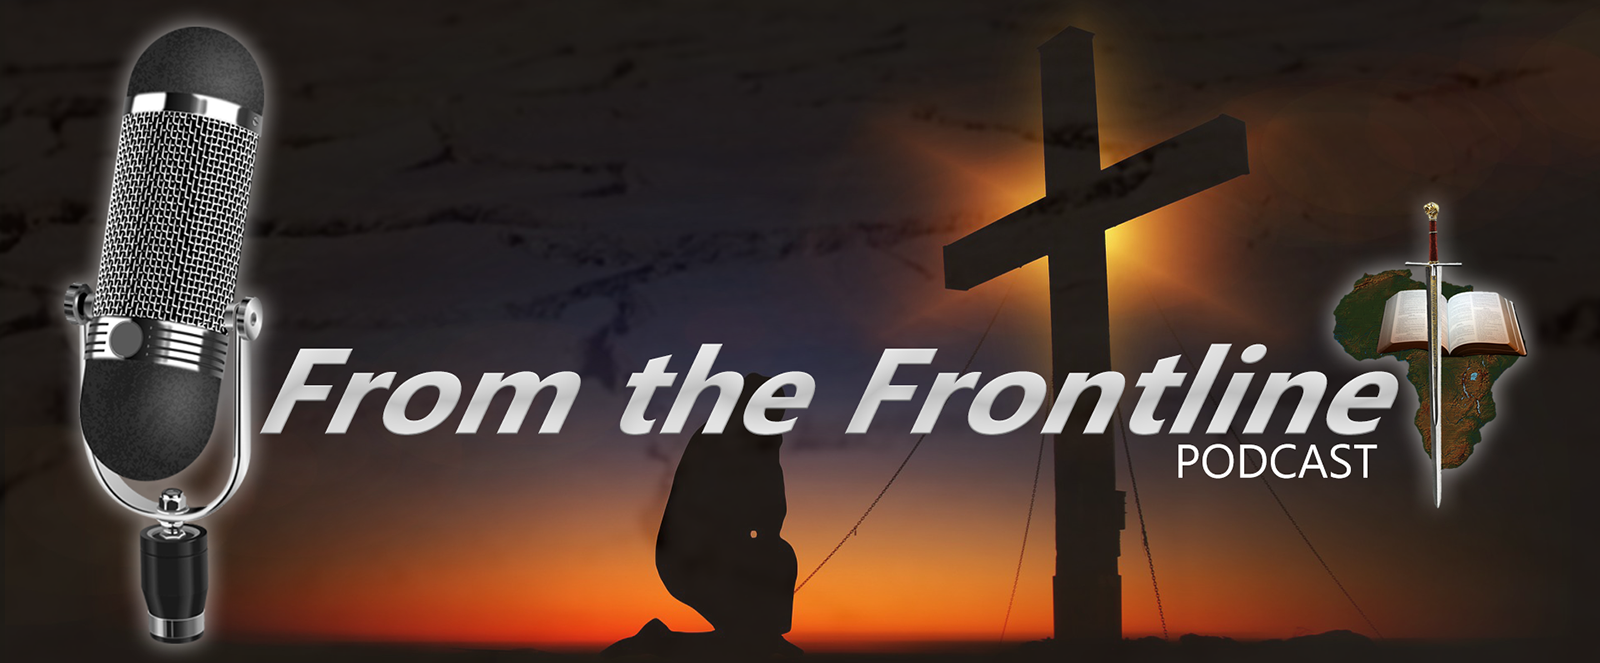 From The Frontline-Episode 6-John Clifford & Hunter Combs-Winning More Muslims for Christ Part 2